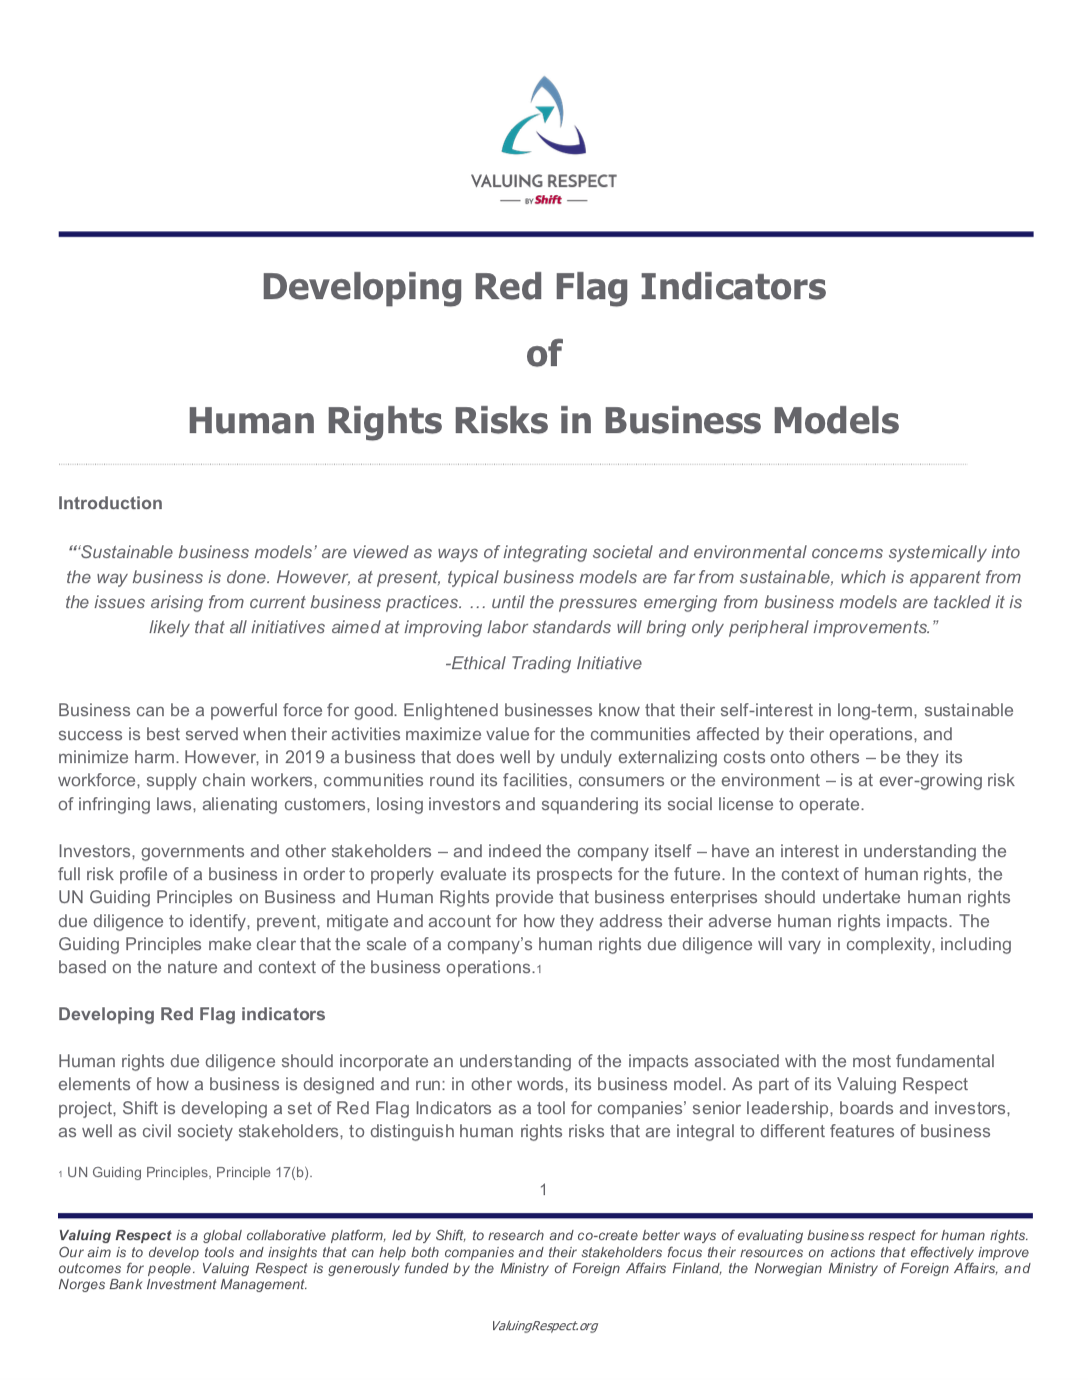 Developing Red Flag Indicators of Human Rights Risks in Business Models